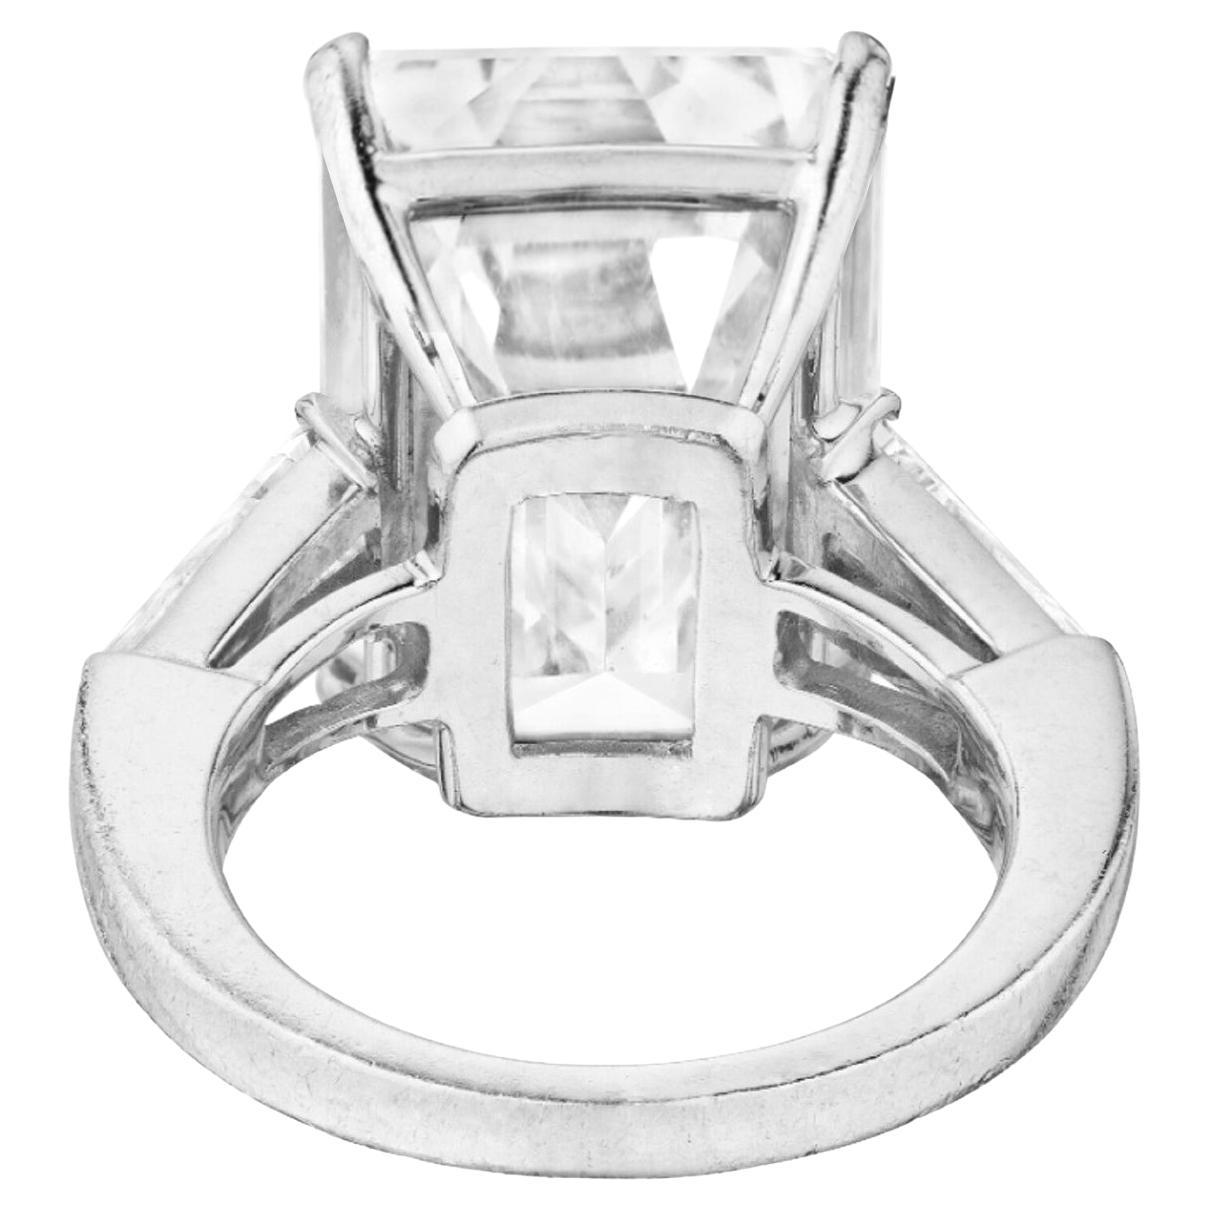 Introducing a breathtaking masterpiece that epitomizes sophistication and grace – a 5-carat emerald-cut diamond ring of extraordinary beauty. This magnificent jewel is a testament to the union of impeccable craftsmanship and timeless design.

Main